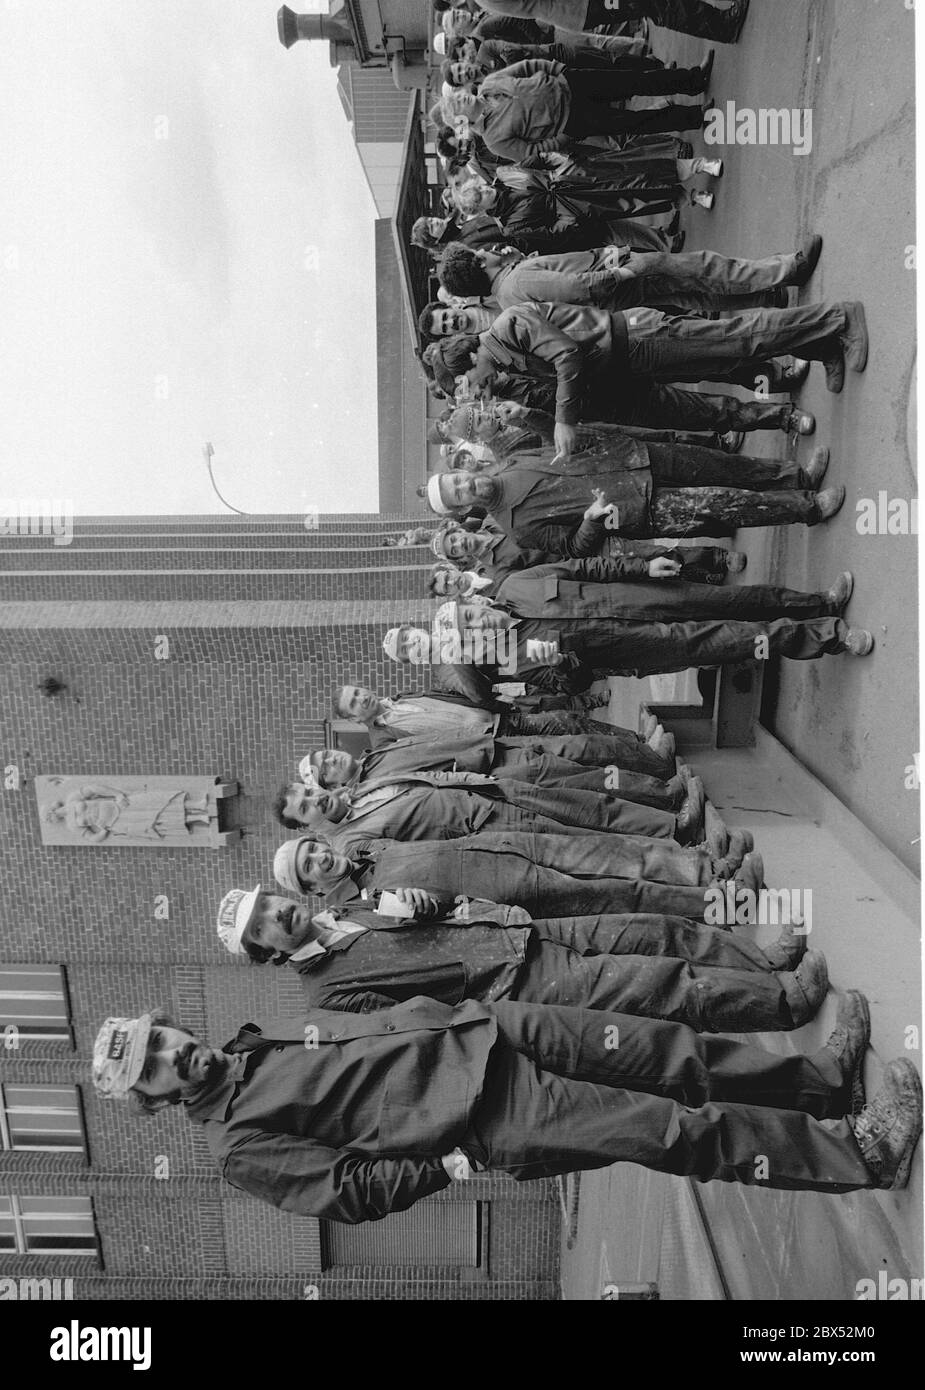 Berlin / Reinickendorf / foreigners / 3.3.1981 Warning strike by IG-Metall at Waggon-Union. Many employees are foreigners, mostly Turks // Strike / Union / [automated translation] Stock Photo